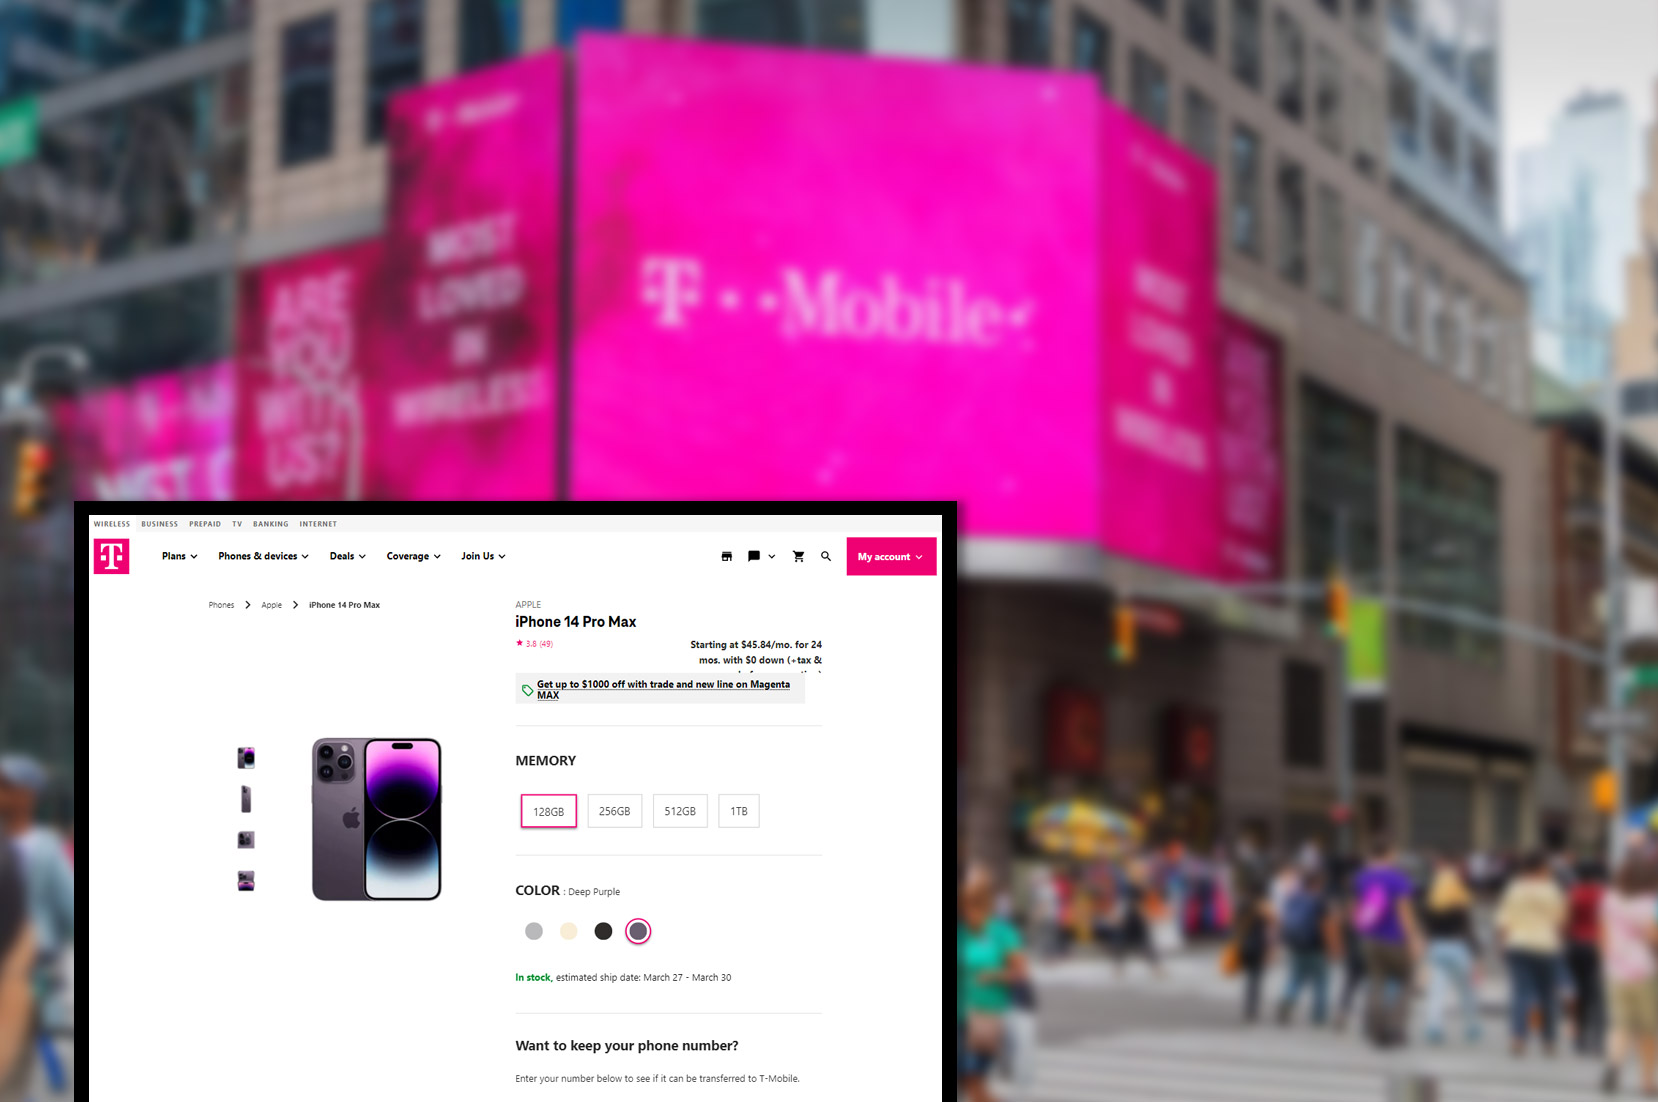 t-mobile-comproduct-pricing-information-and-image-scraping-services